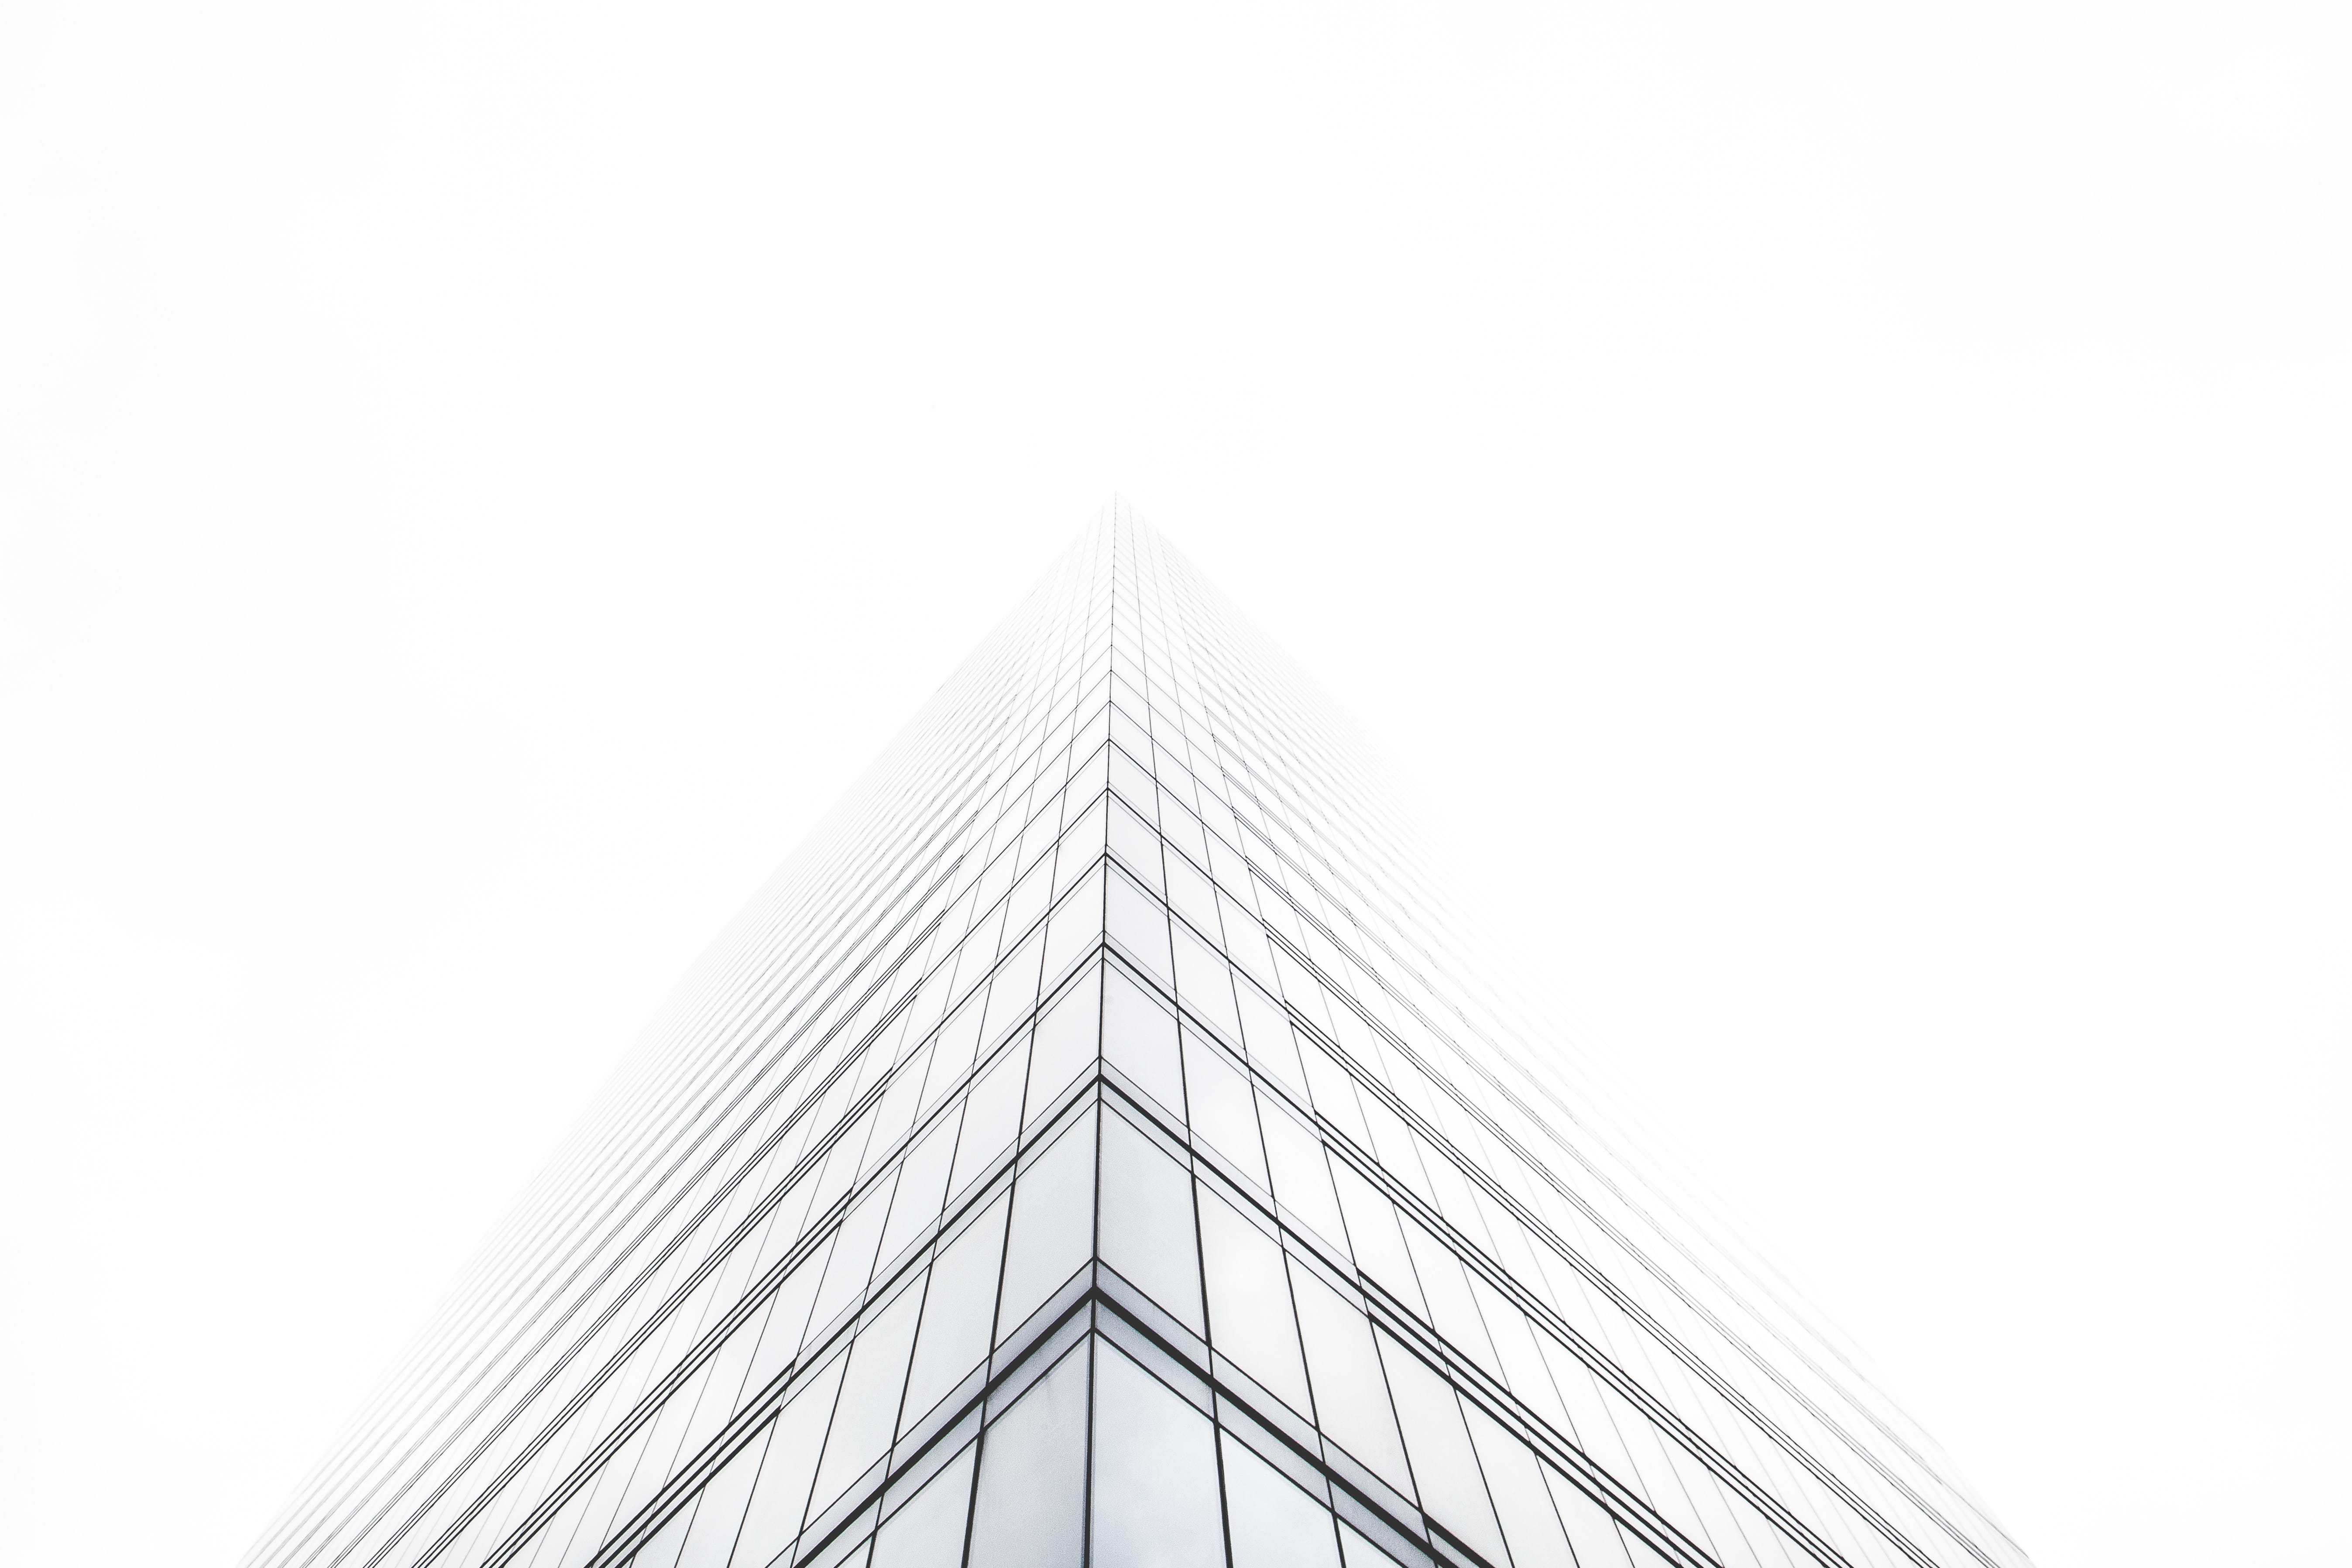 bottom view of glass building, low angle photography of skyscraper under cloudy sky during daytime